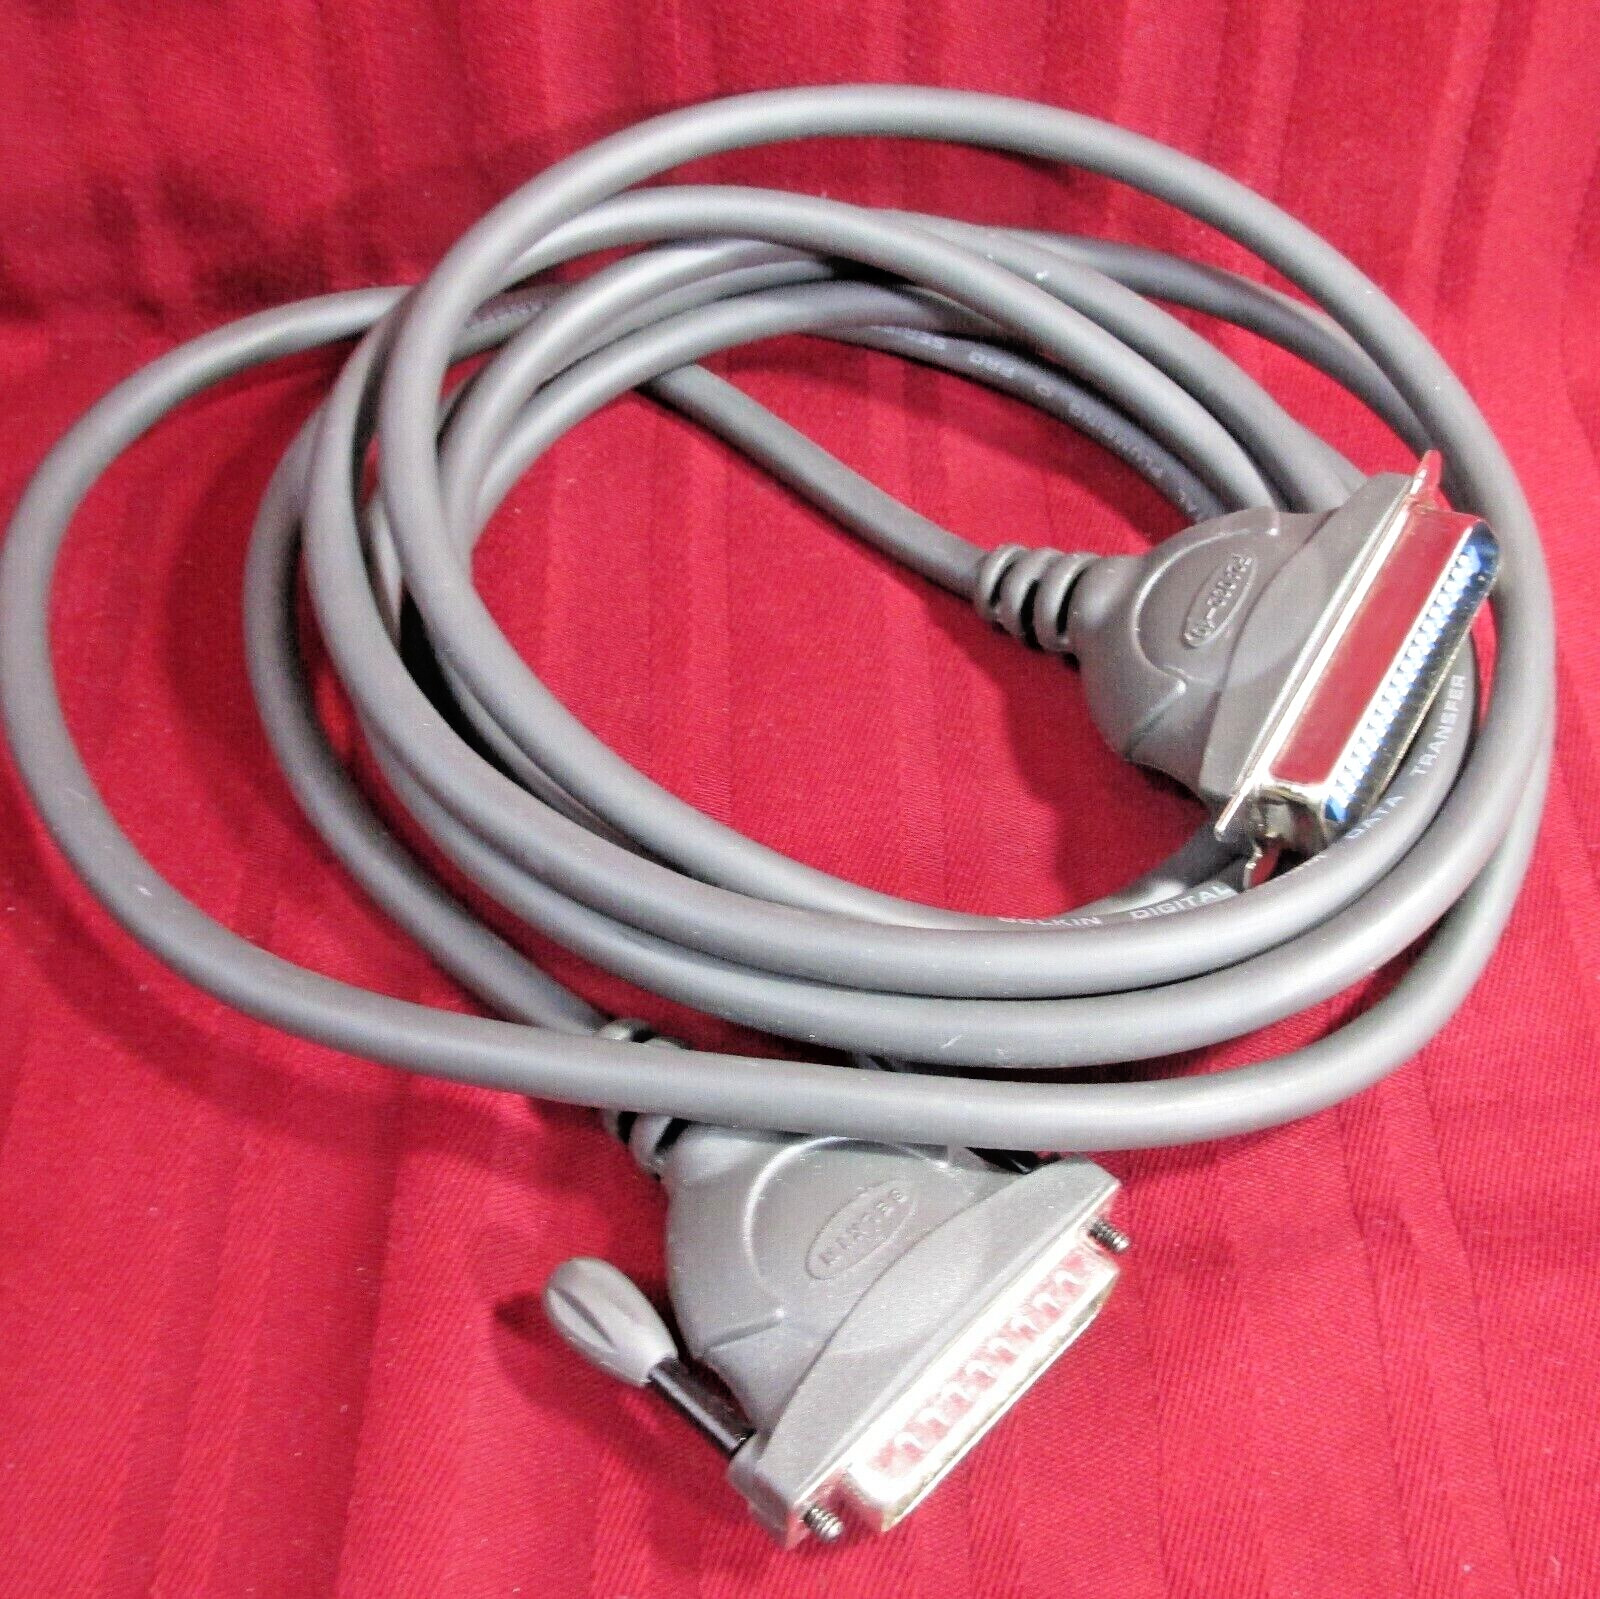 6' F2A036-06 Cable Cord BELKIN Bi-Directional Parallel SCSI Printer IEEE 1284